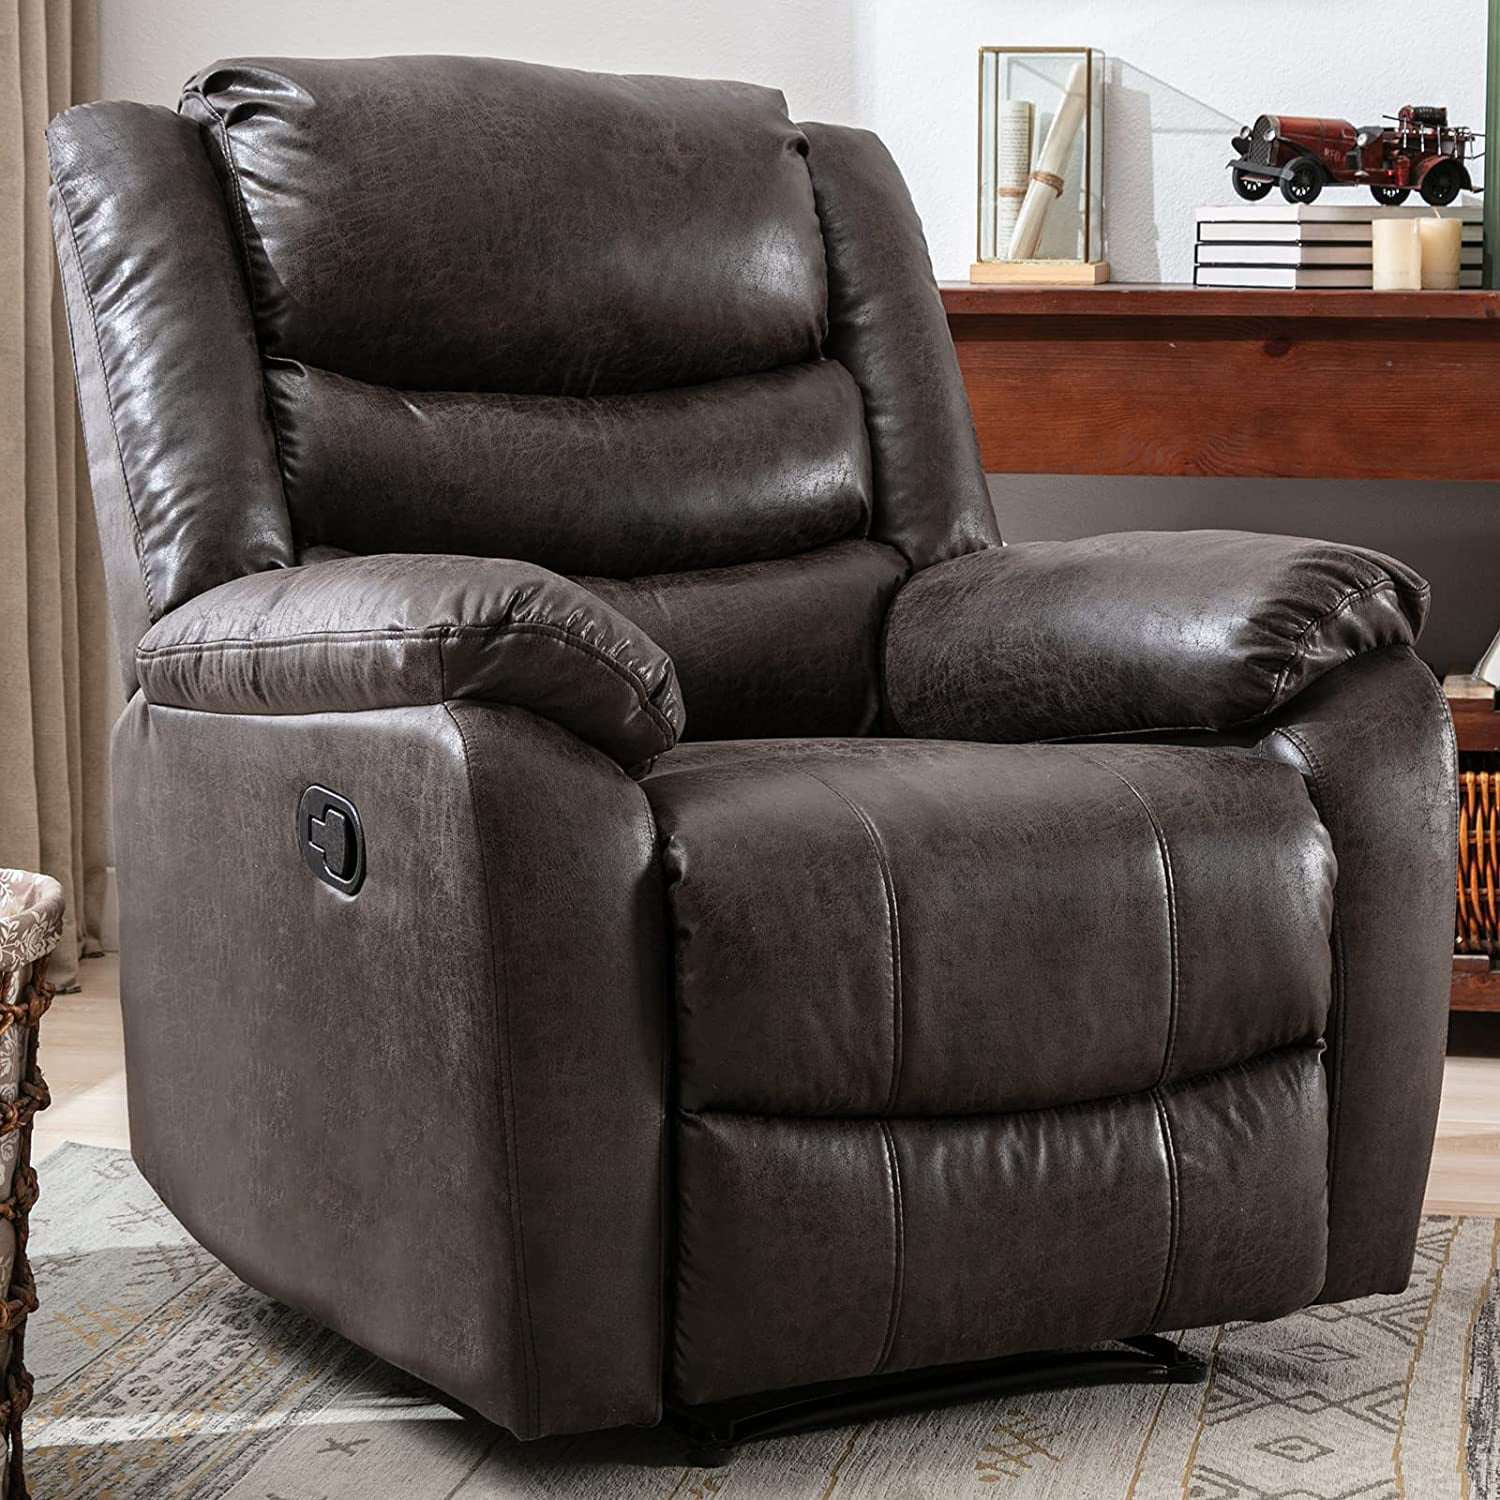 Small RV Recliner Chair Wall Adjustable Overstuffed Furniture Wide Arm Brown New 